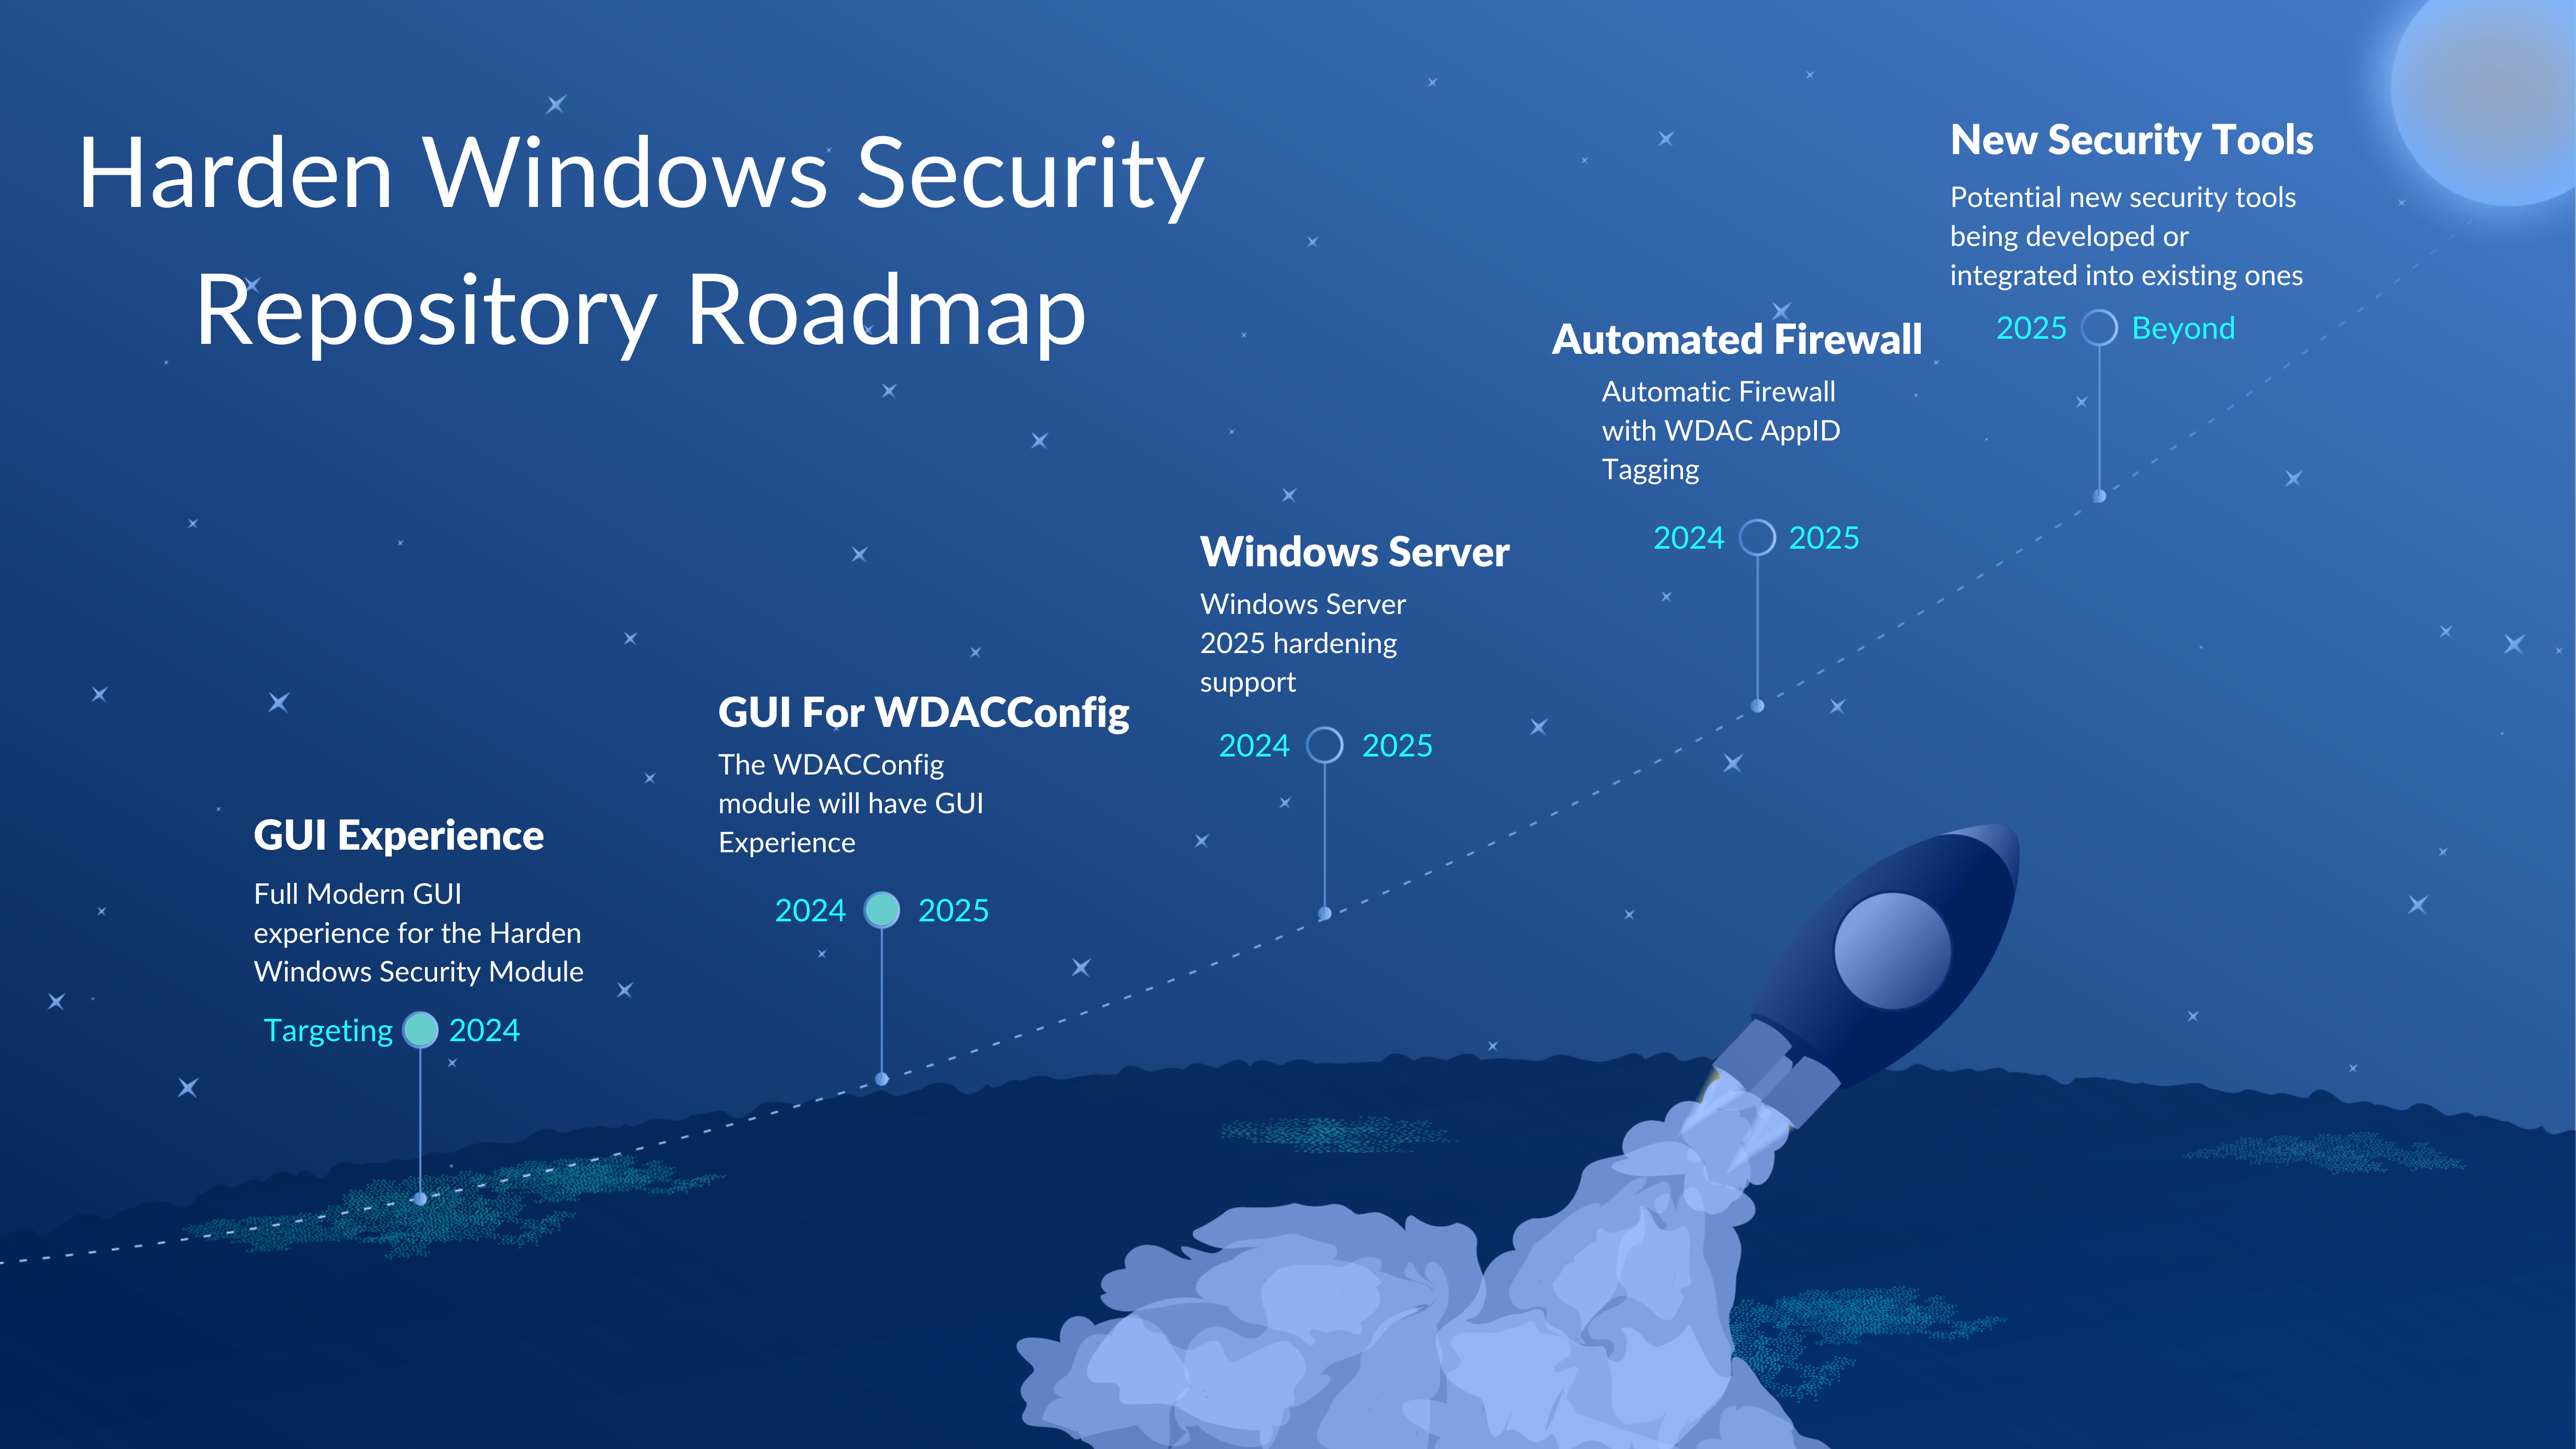 The Harden Windows Security Repository Roadmap